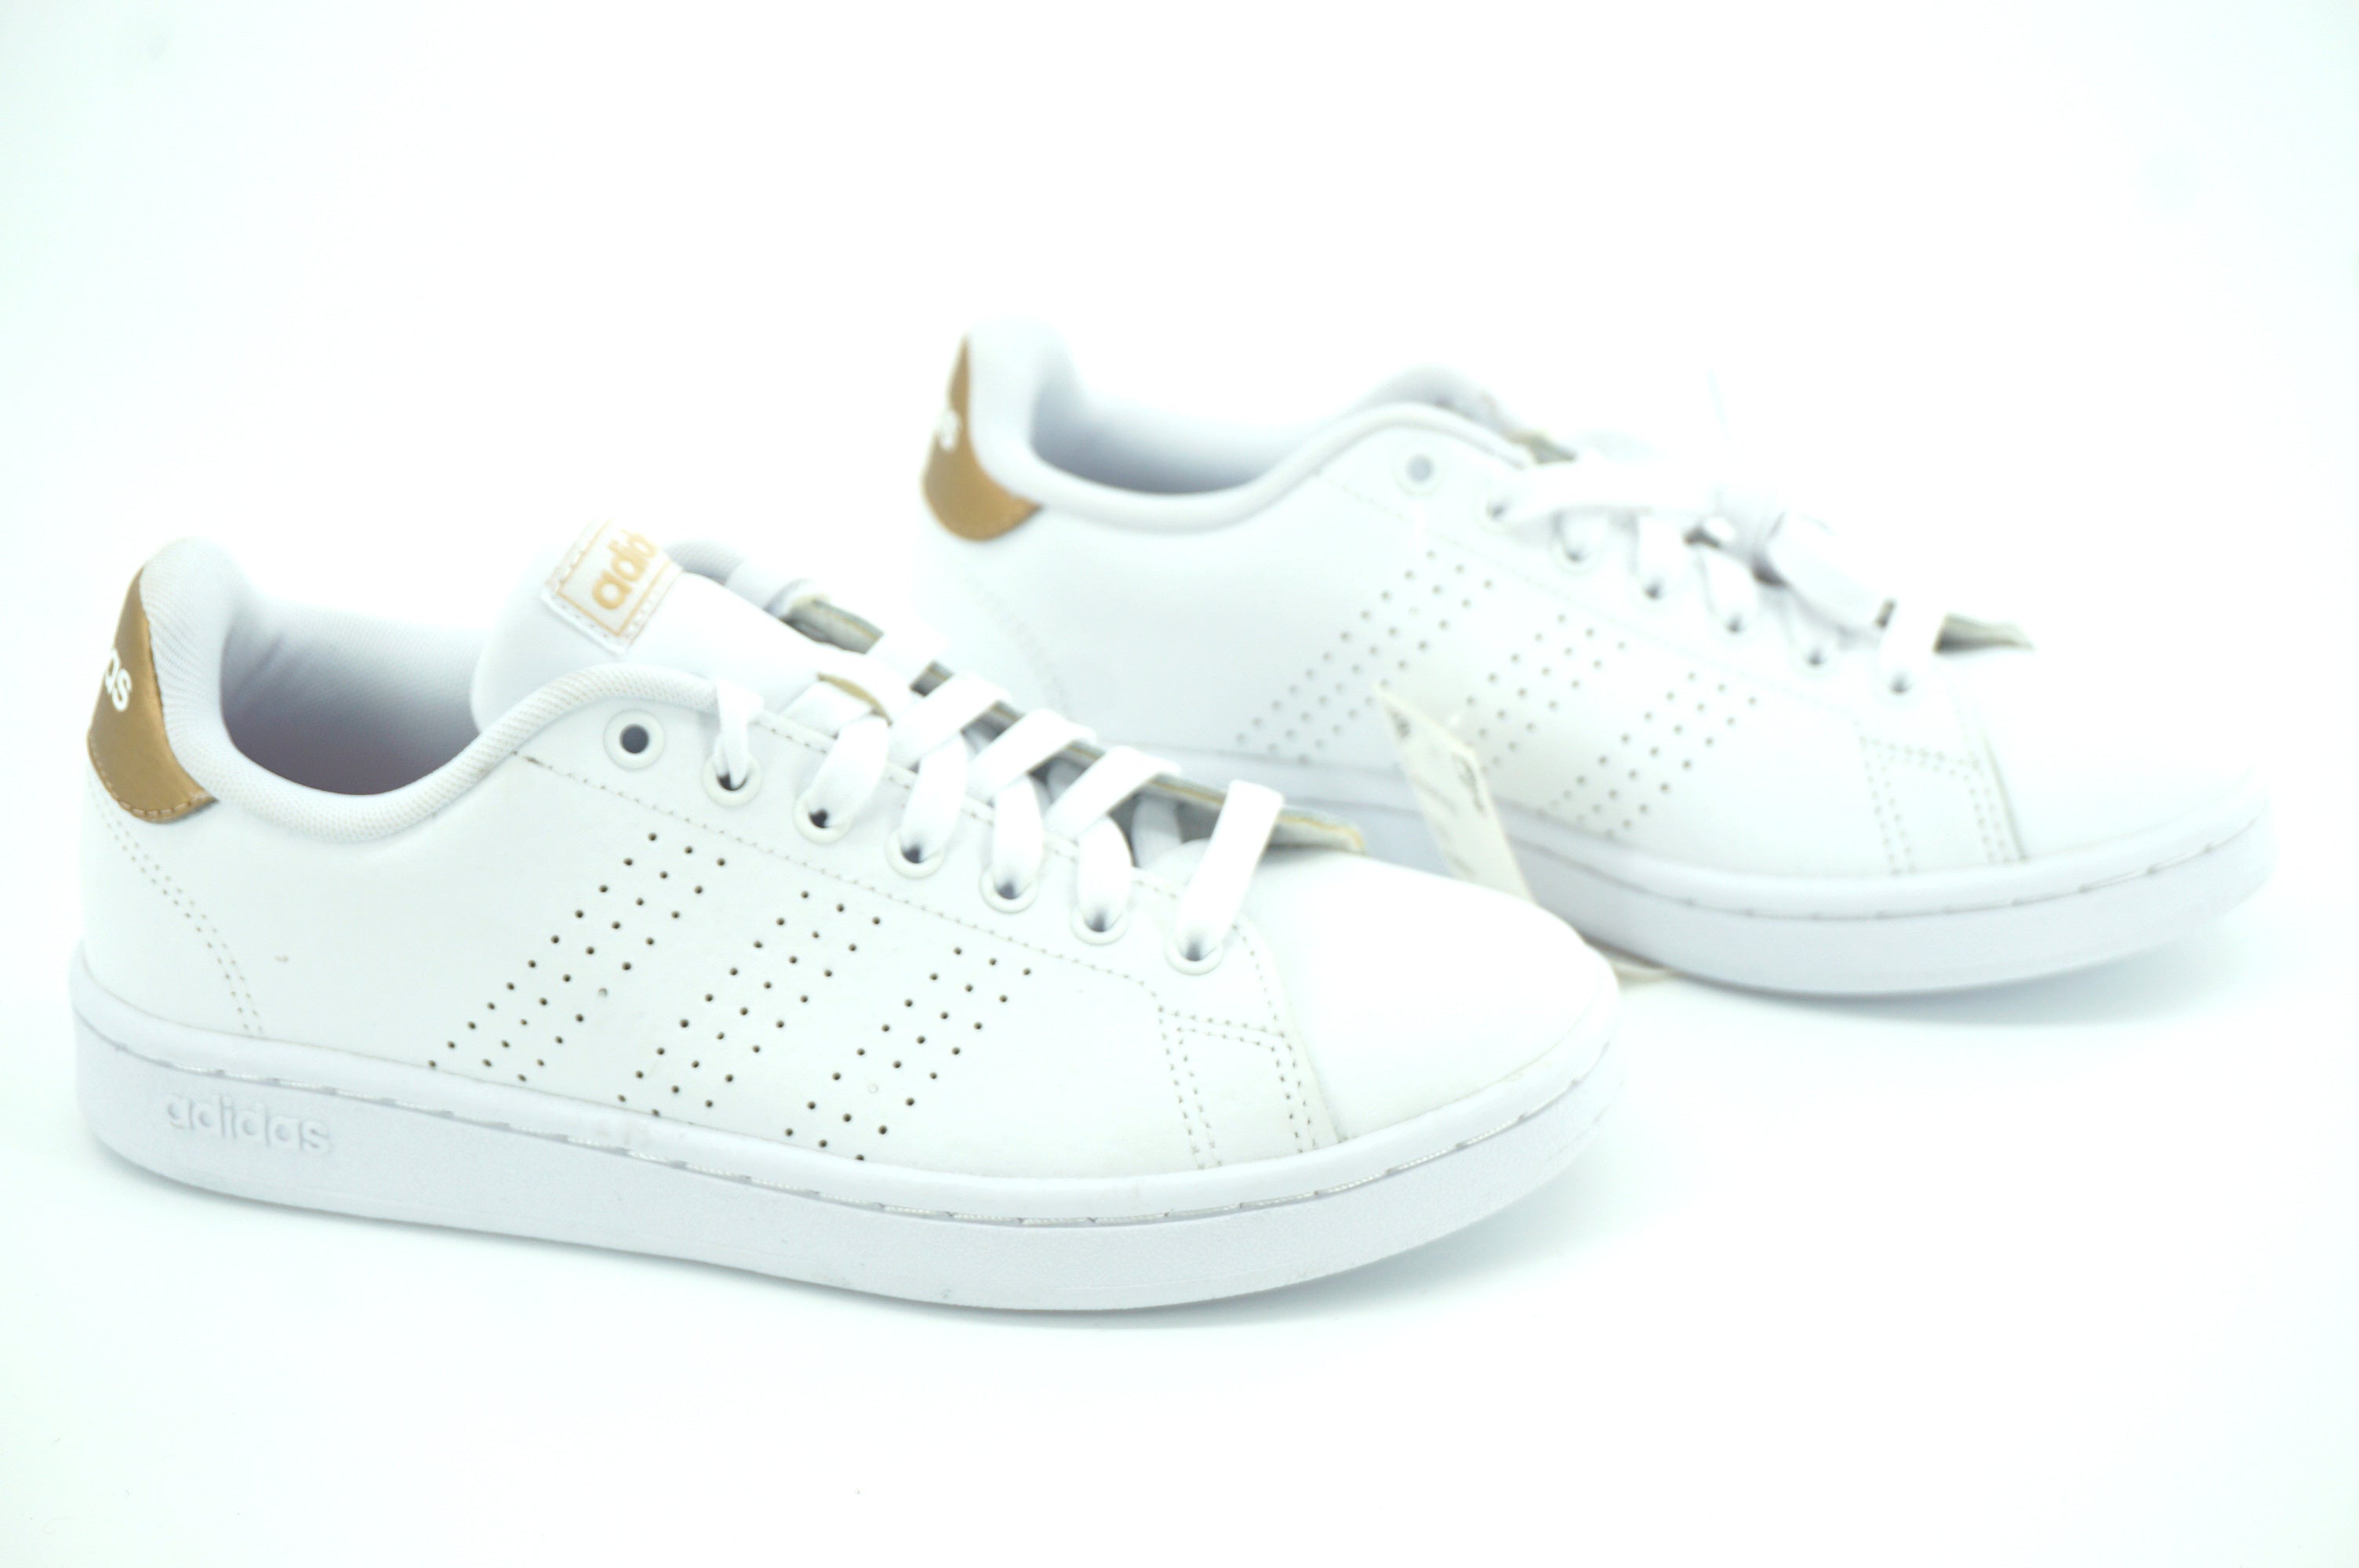 Adidas Women Avantage White Leather Lace-Up Sneaker Size 6.5 striped